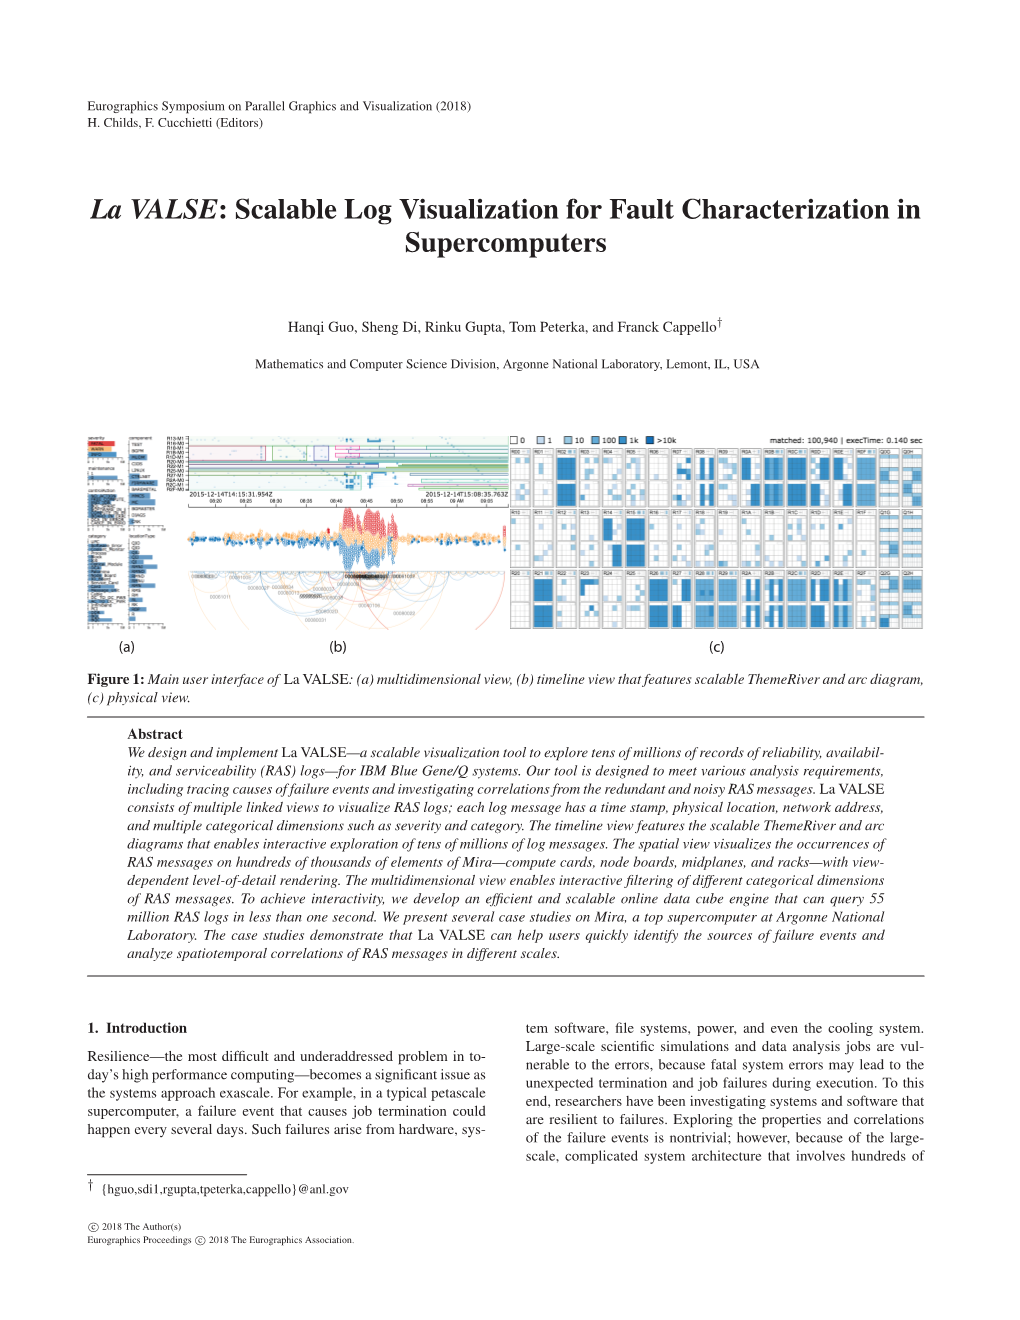 La VALSE: Scalable Log Visualization for Fault Characterization in Supercomputers